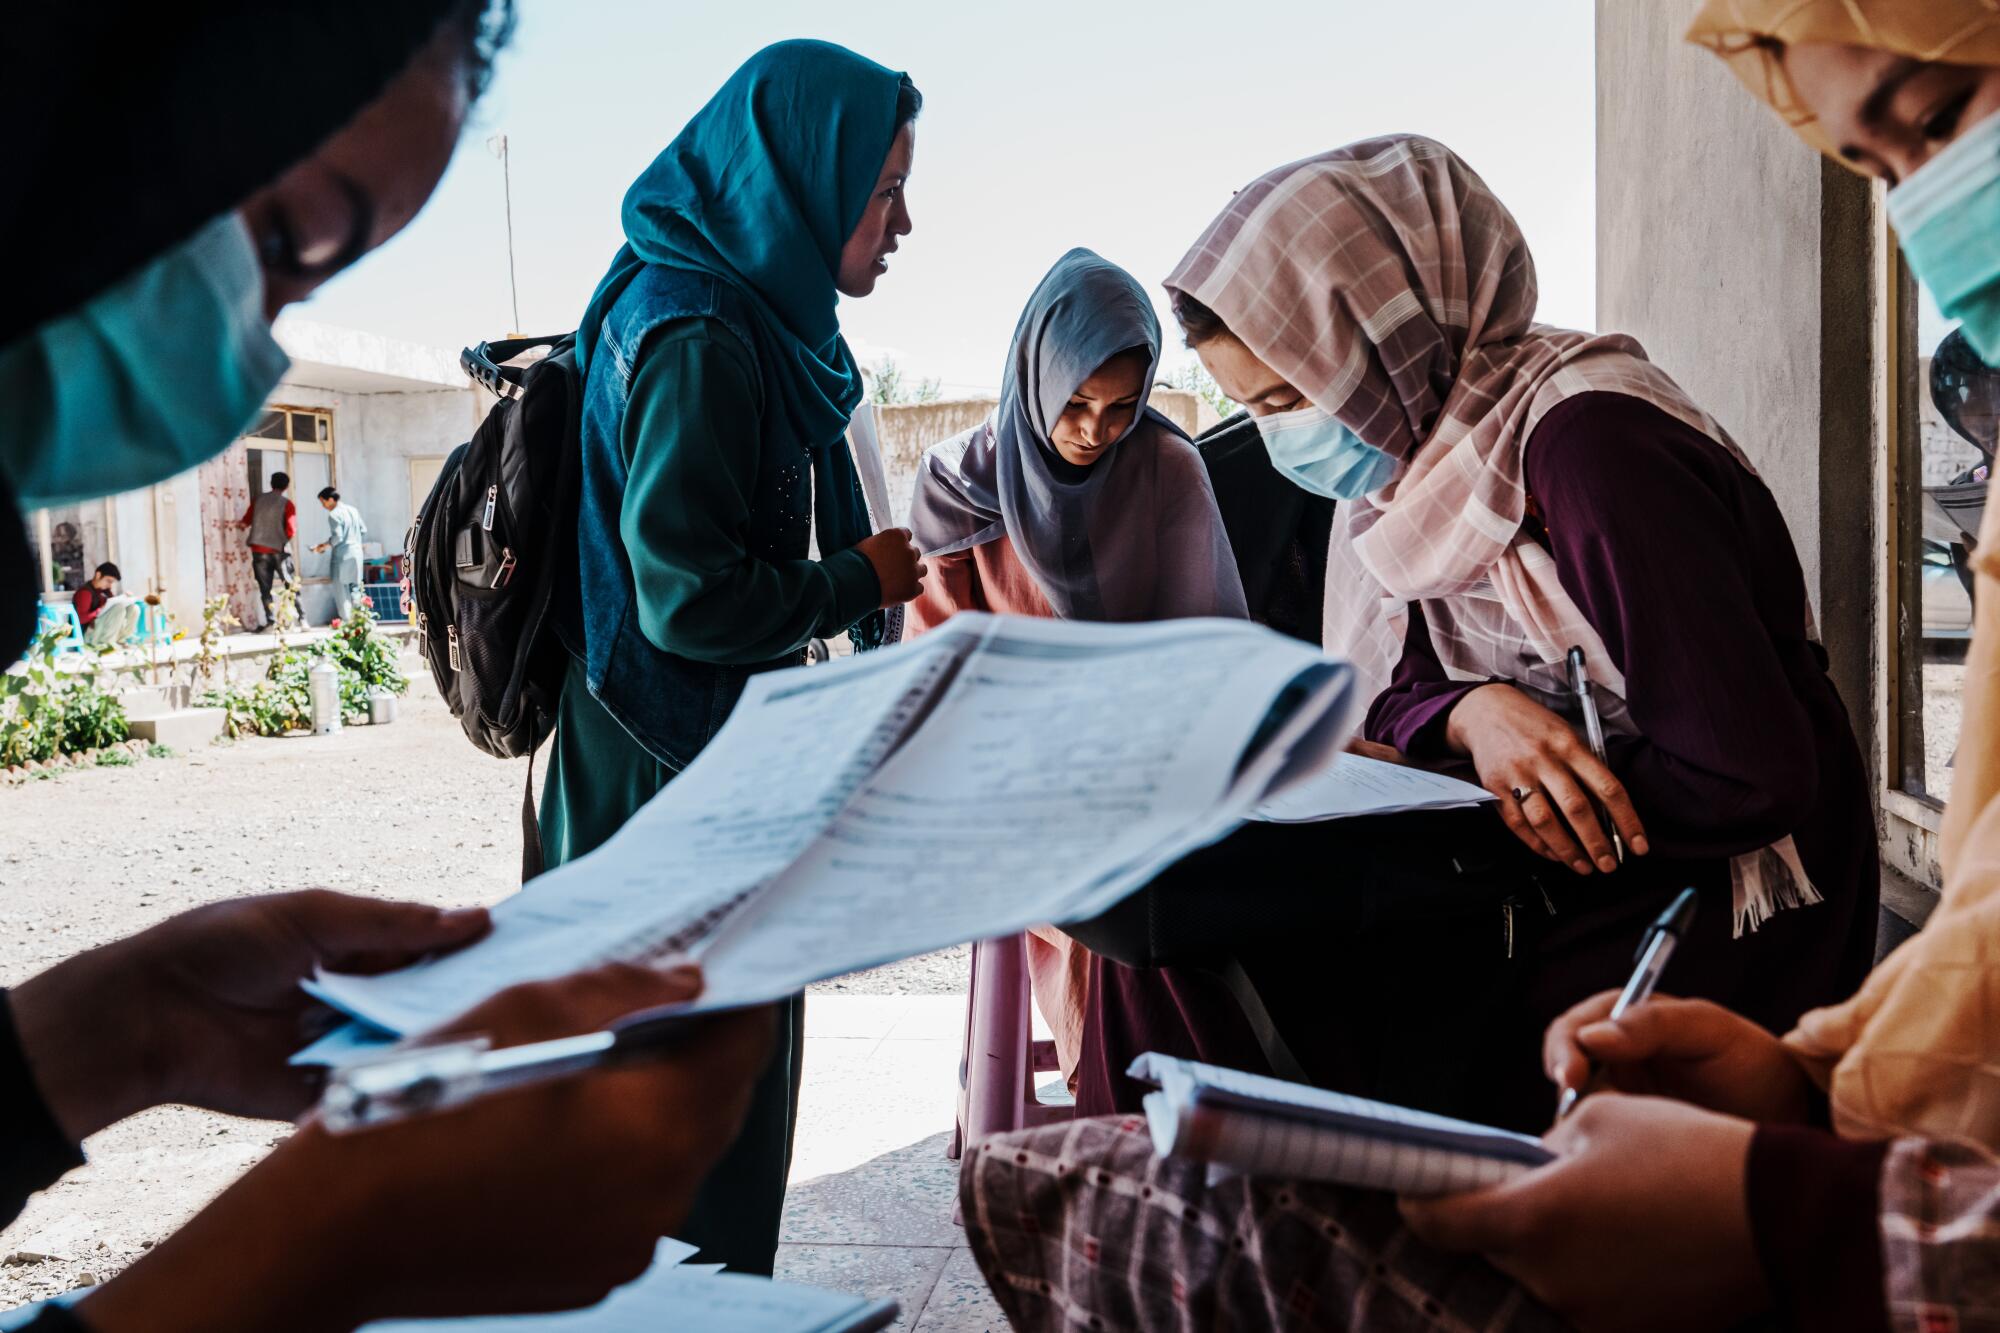 Meena Ibrahimi, 20, center, and other students study for the Kankor exam.